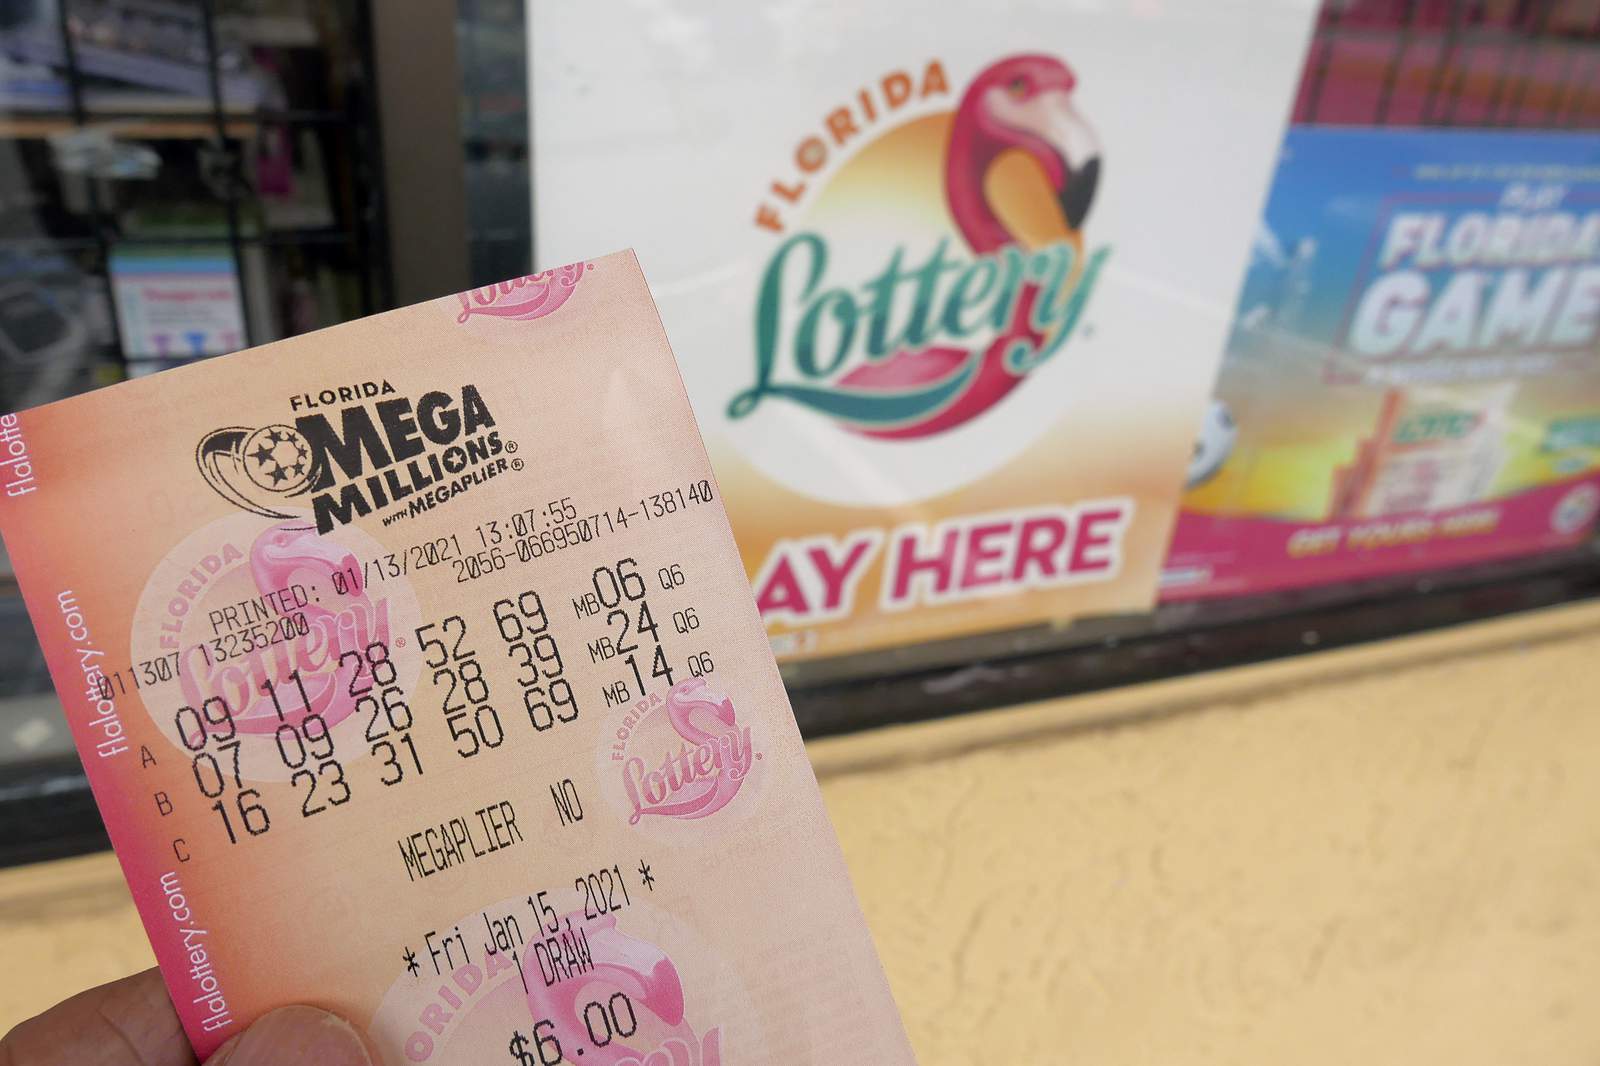 3 big lottery winners revealed in South Florida